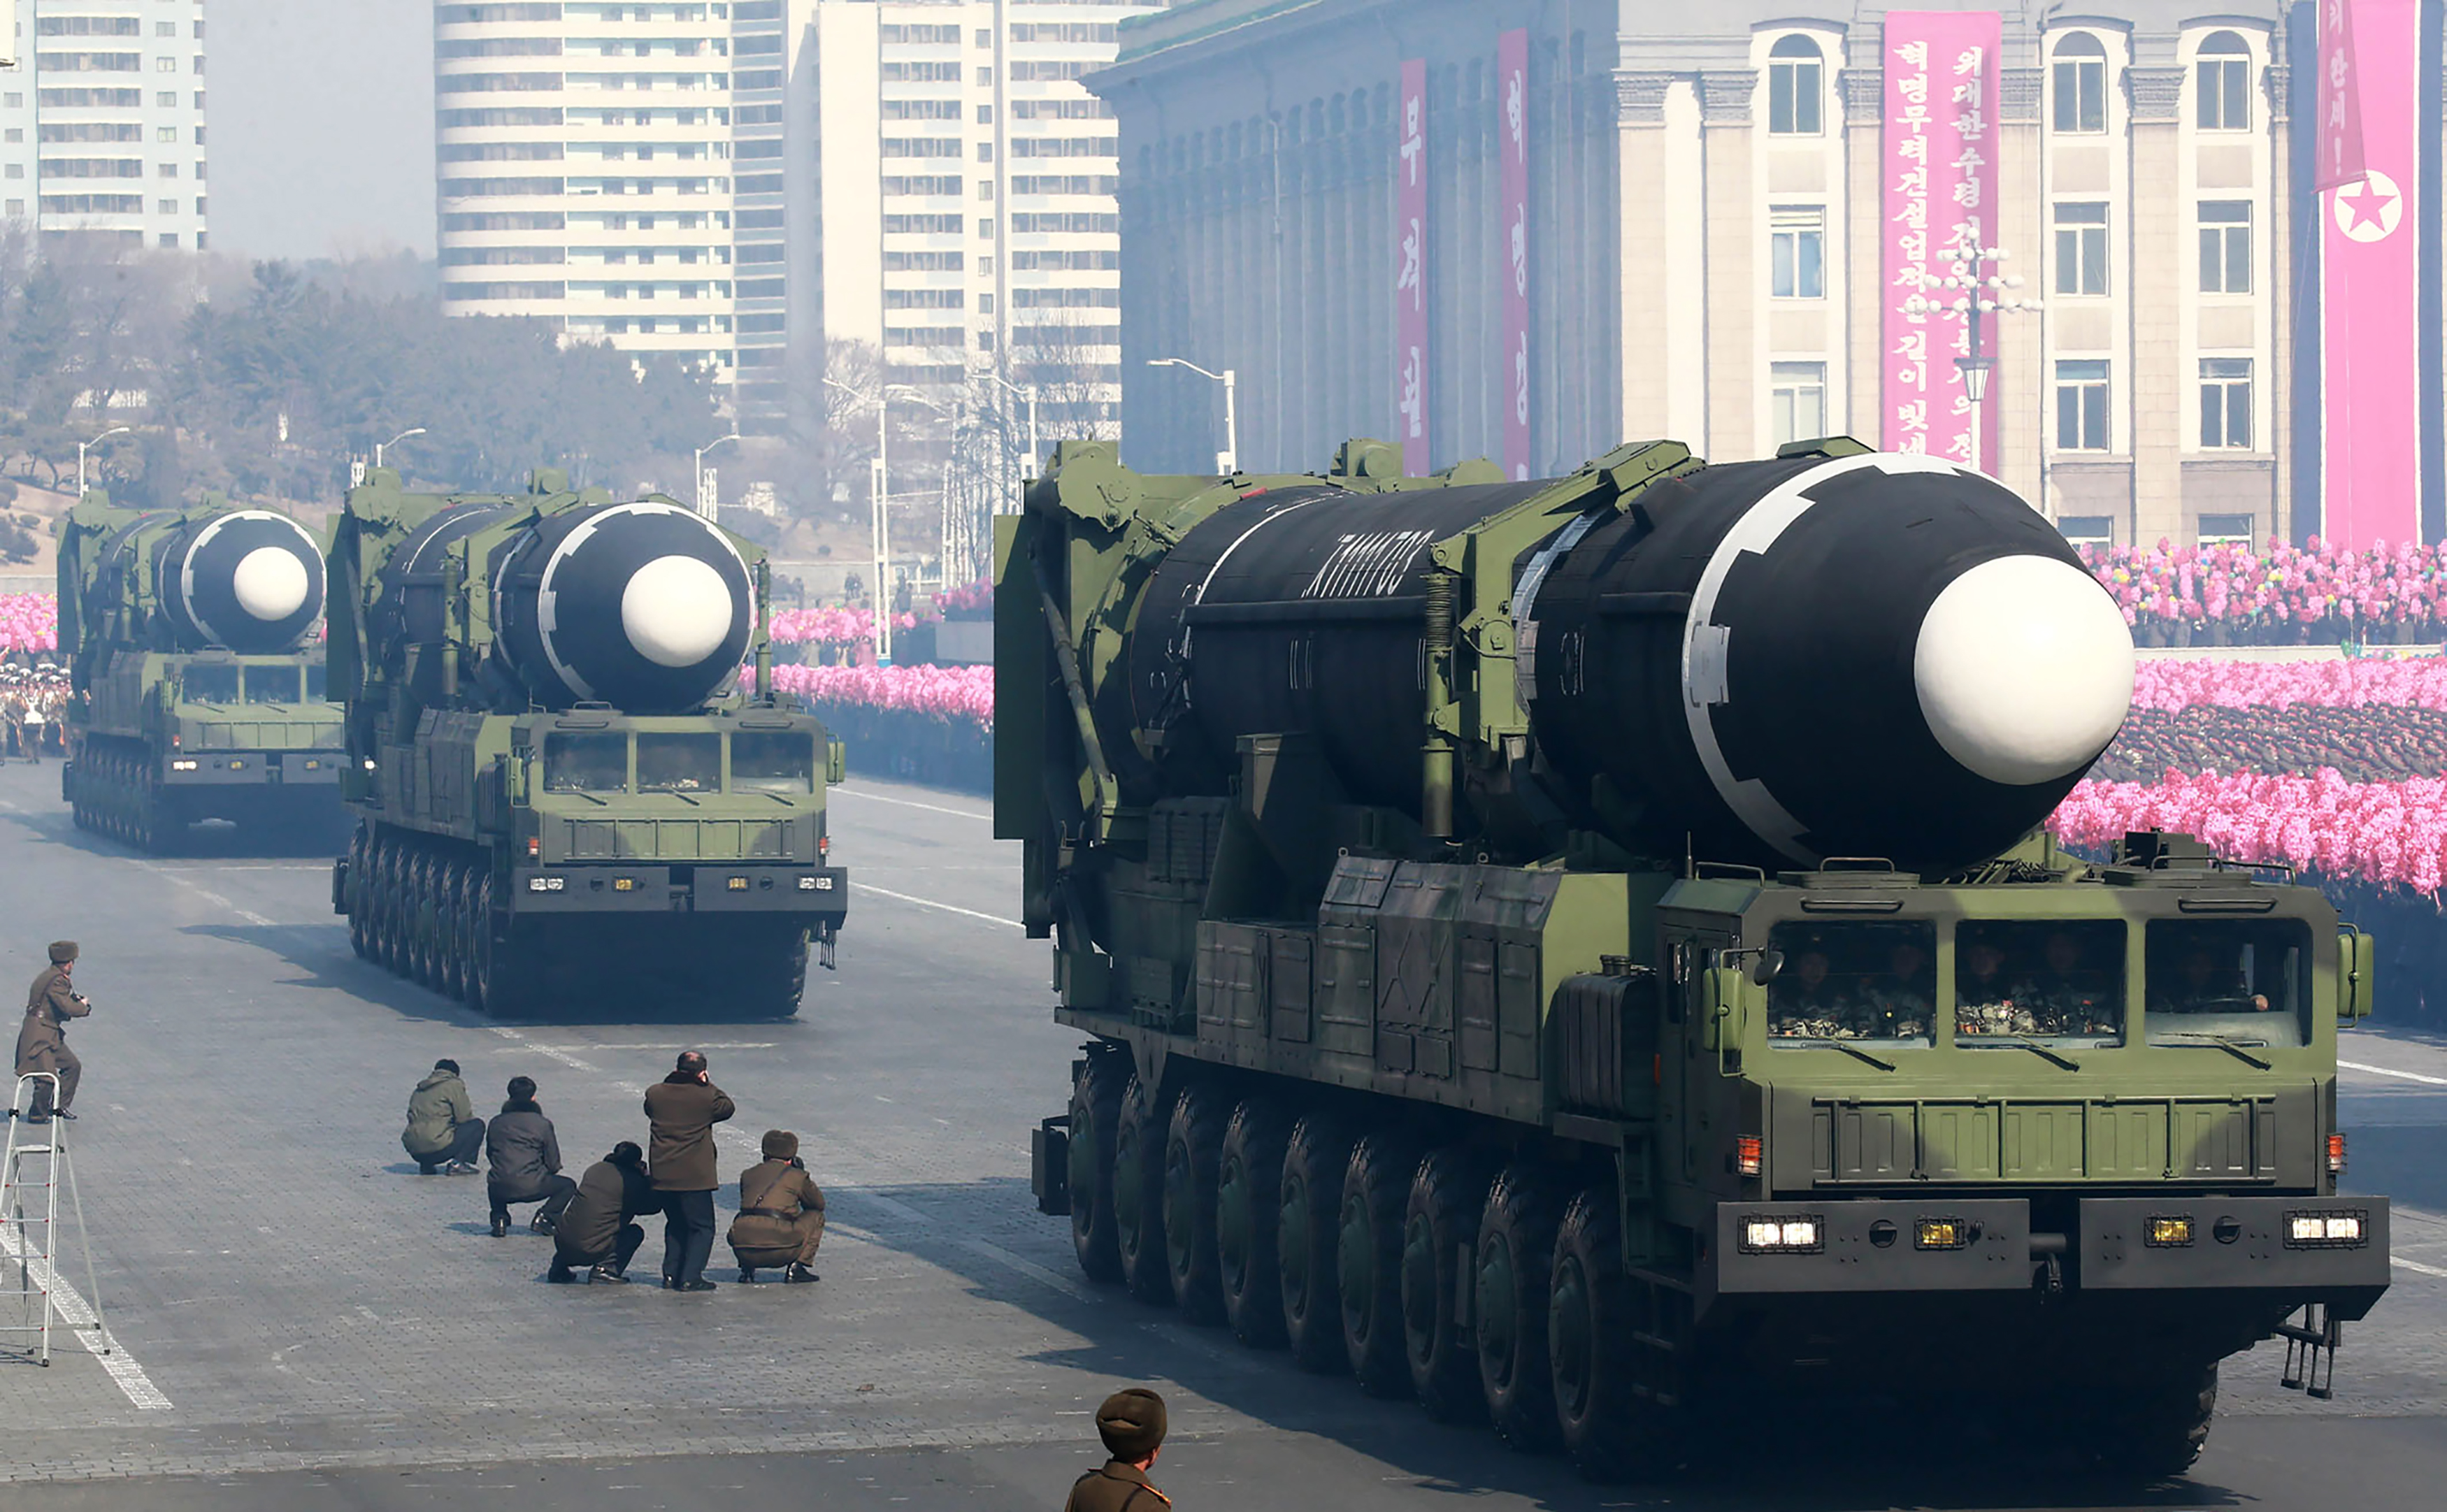 This photo taken on Feb. 8, 2018 and released on Feb.9, 2018 by North Korea's official Korean Central News Agency (KCNA) shows Hwasong-15 ballistic missile during the military parade to mark the 70th anniversary of the Korean People's Army in Pyongyang. (KCNA/KNS/AFP/Getty Images)